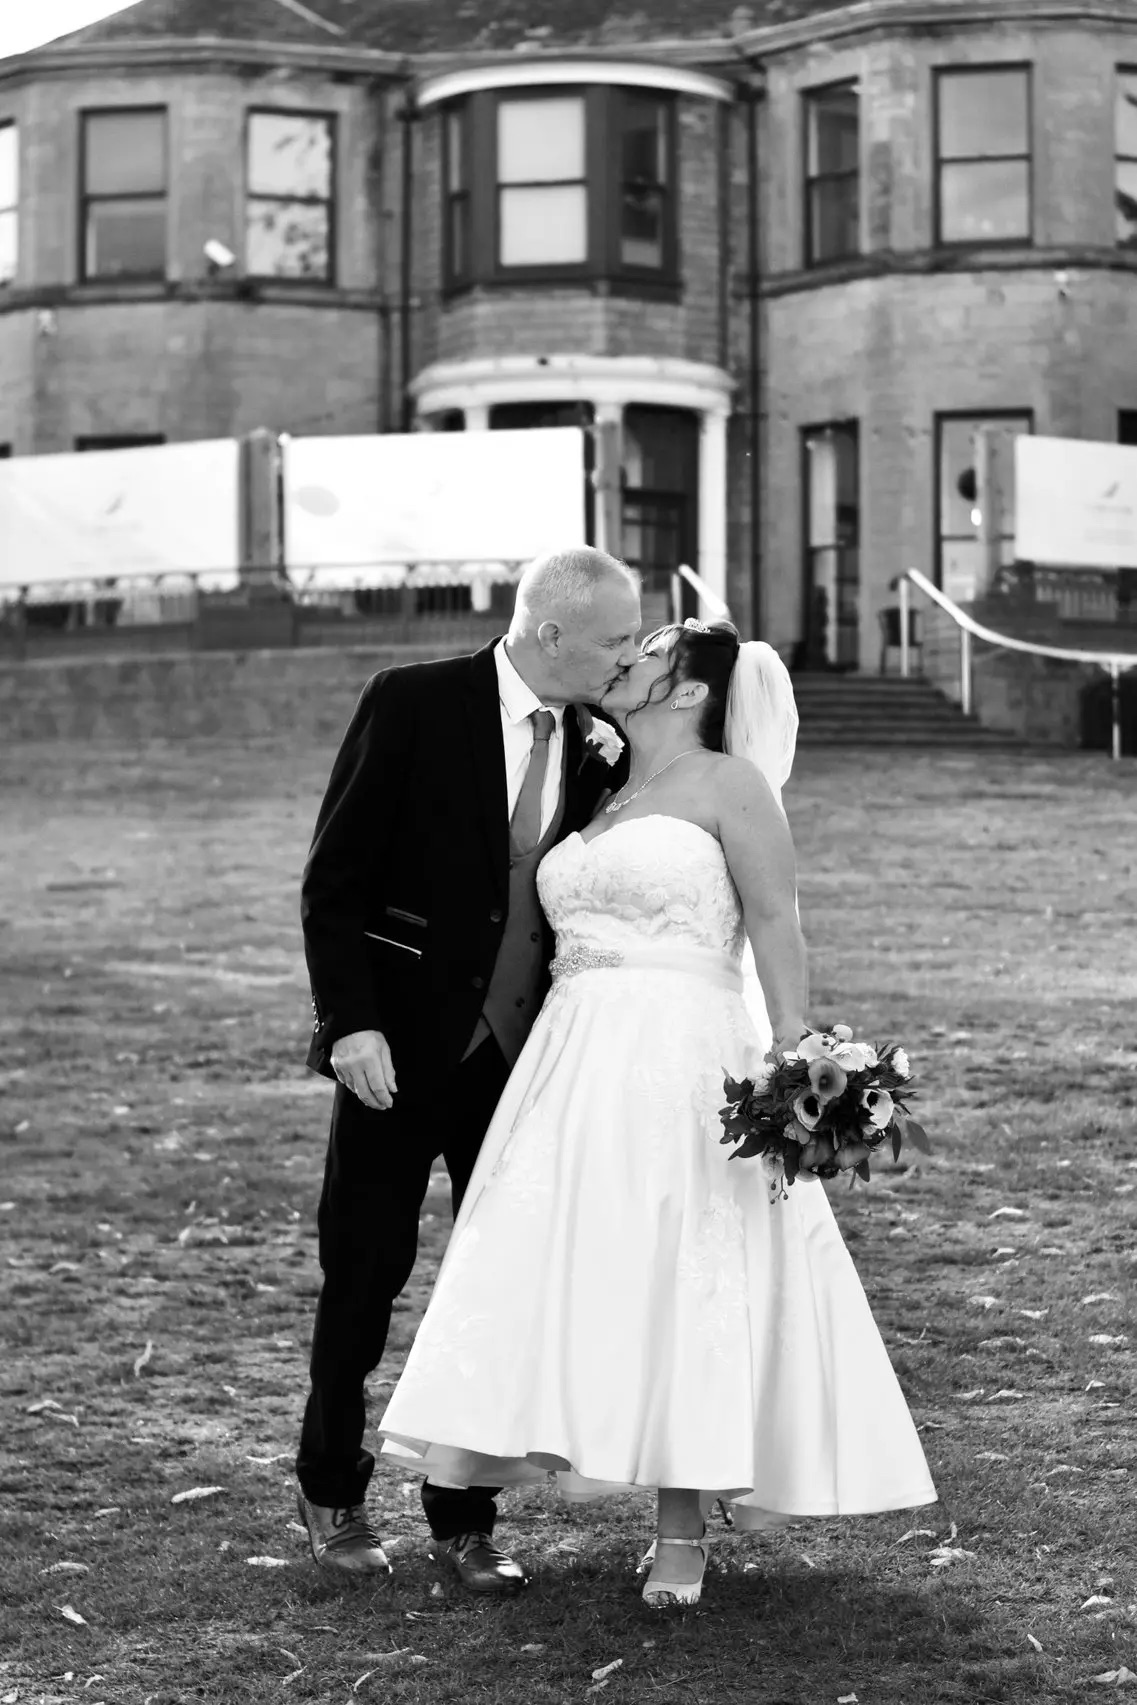 Nicola & mark sharing a kiss in the Carr Bank grounds at Carr Bank Wedding Venue Mansfield Nottinghamshire 